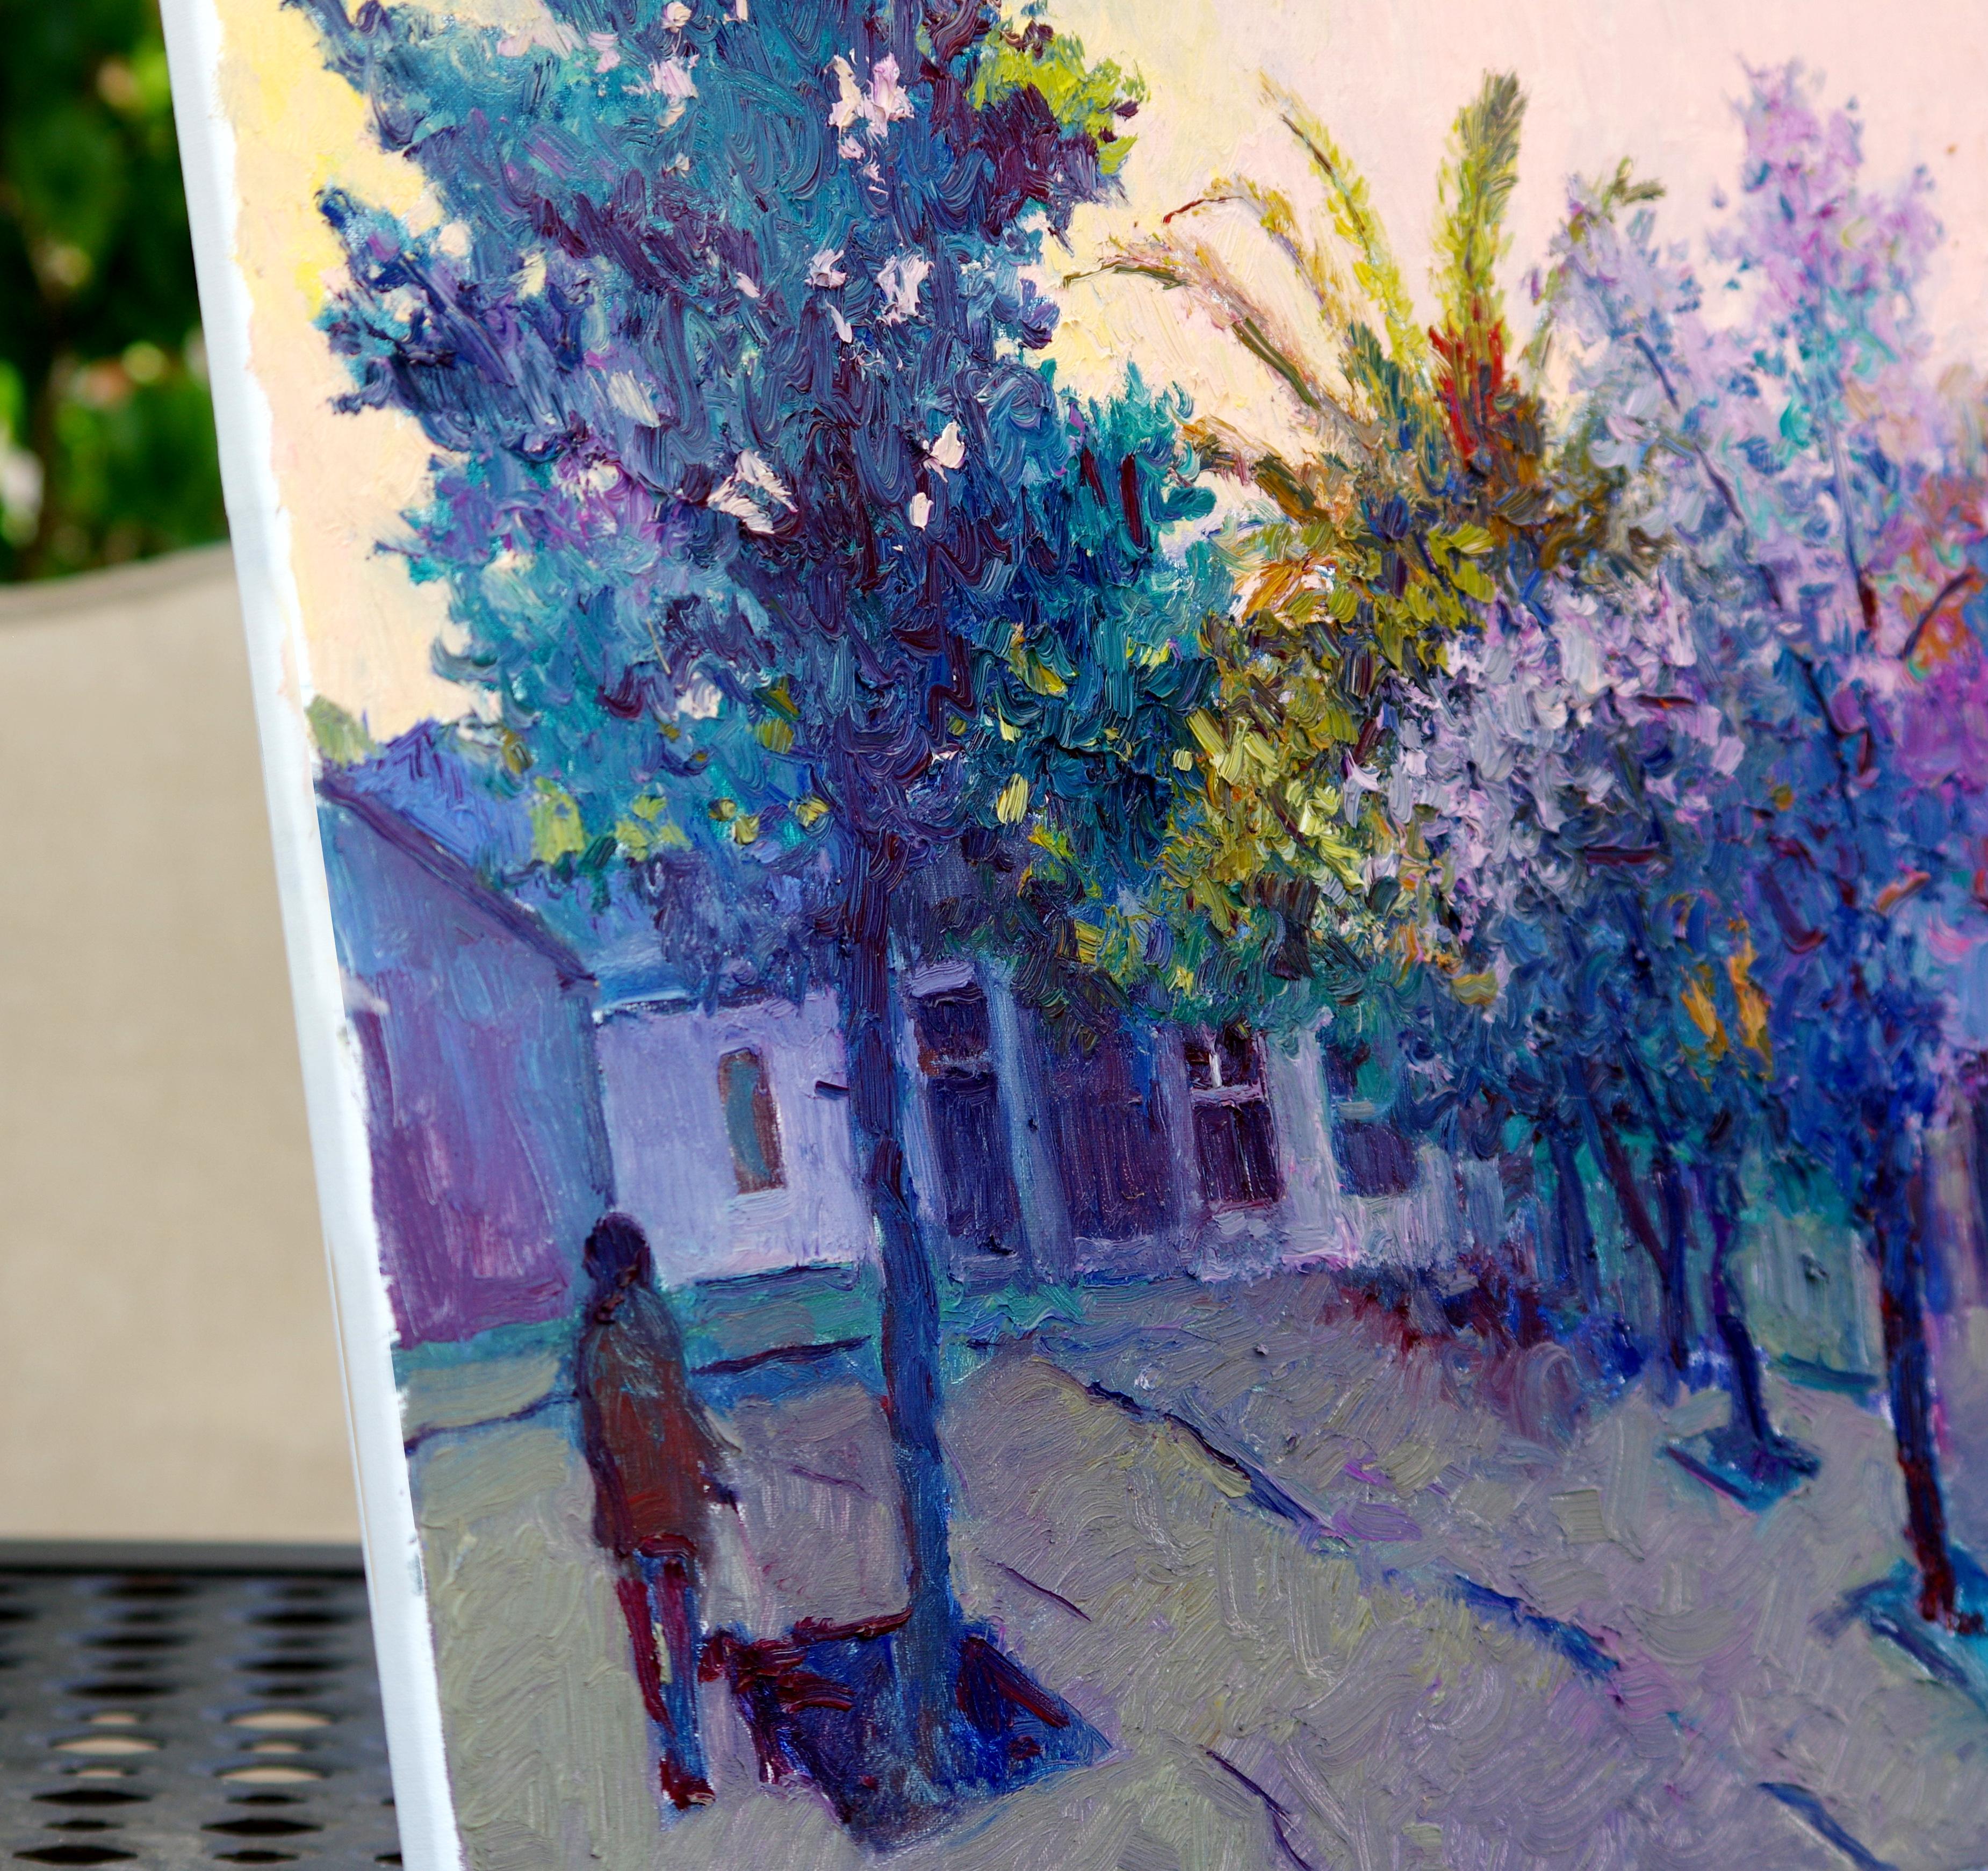 <p>Artist Comments<br /> The last moments of daylight in a residential neighborhood. Woman walking her dog. Cool blues and purple in the landscape rest on a muted peach sky. Expressionist brushwork express the fleetingness of the scene.  This